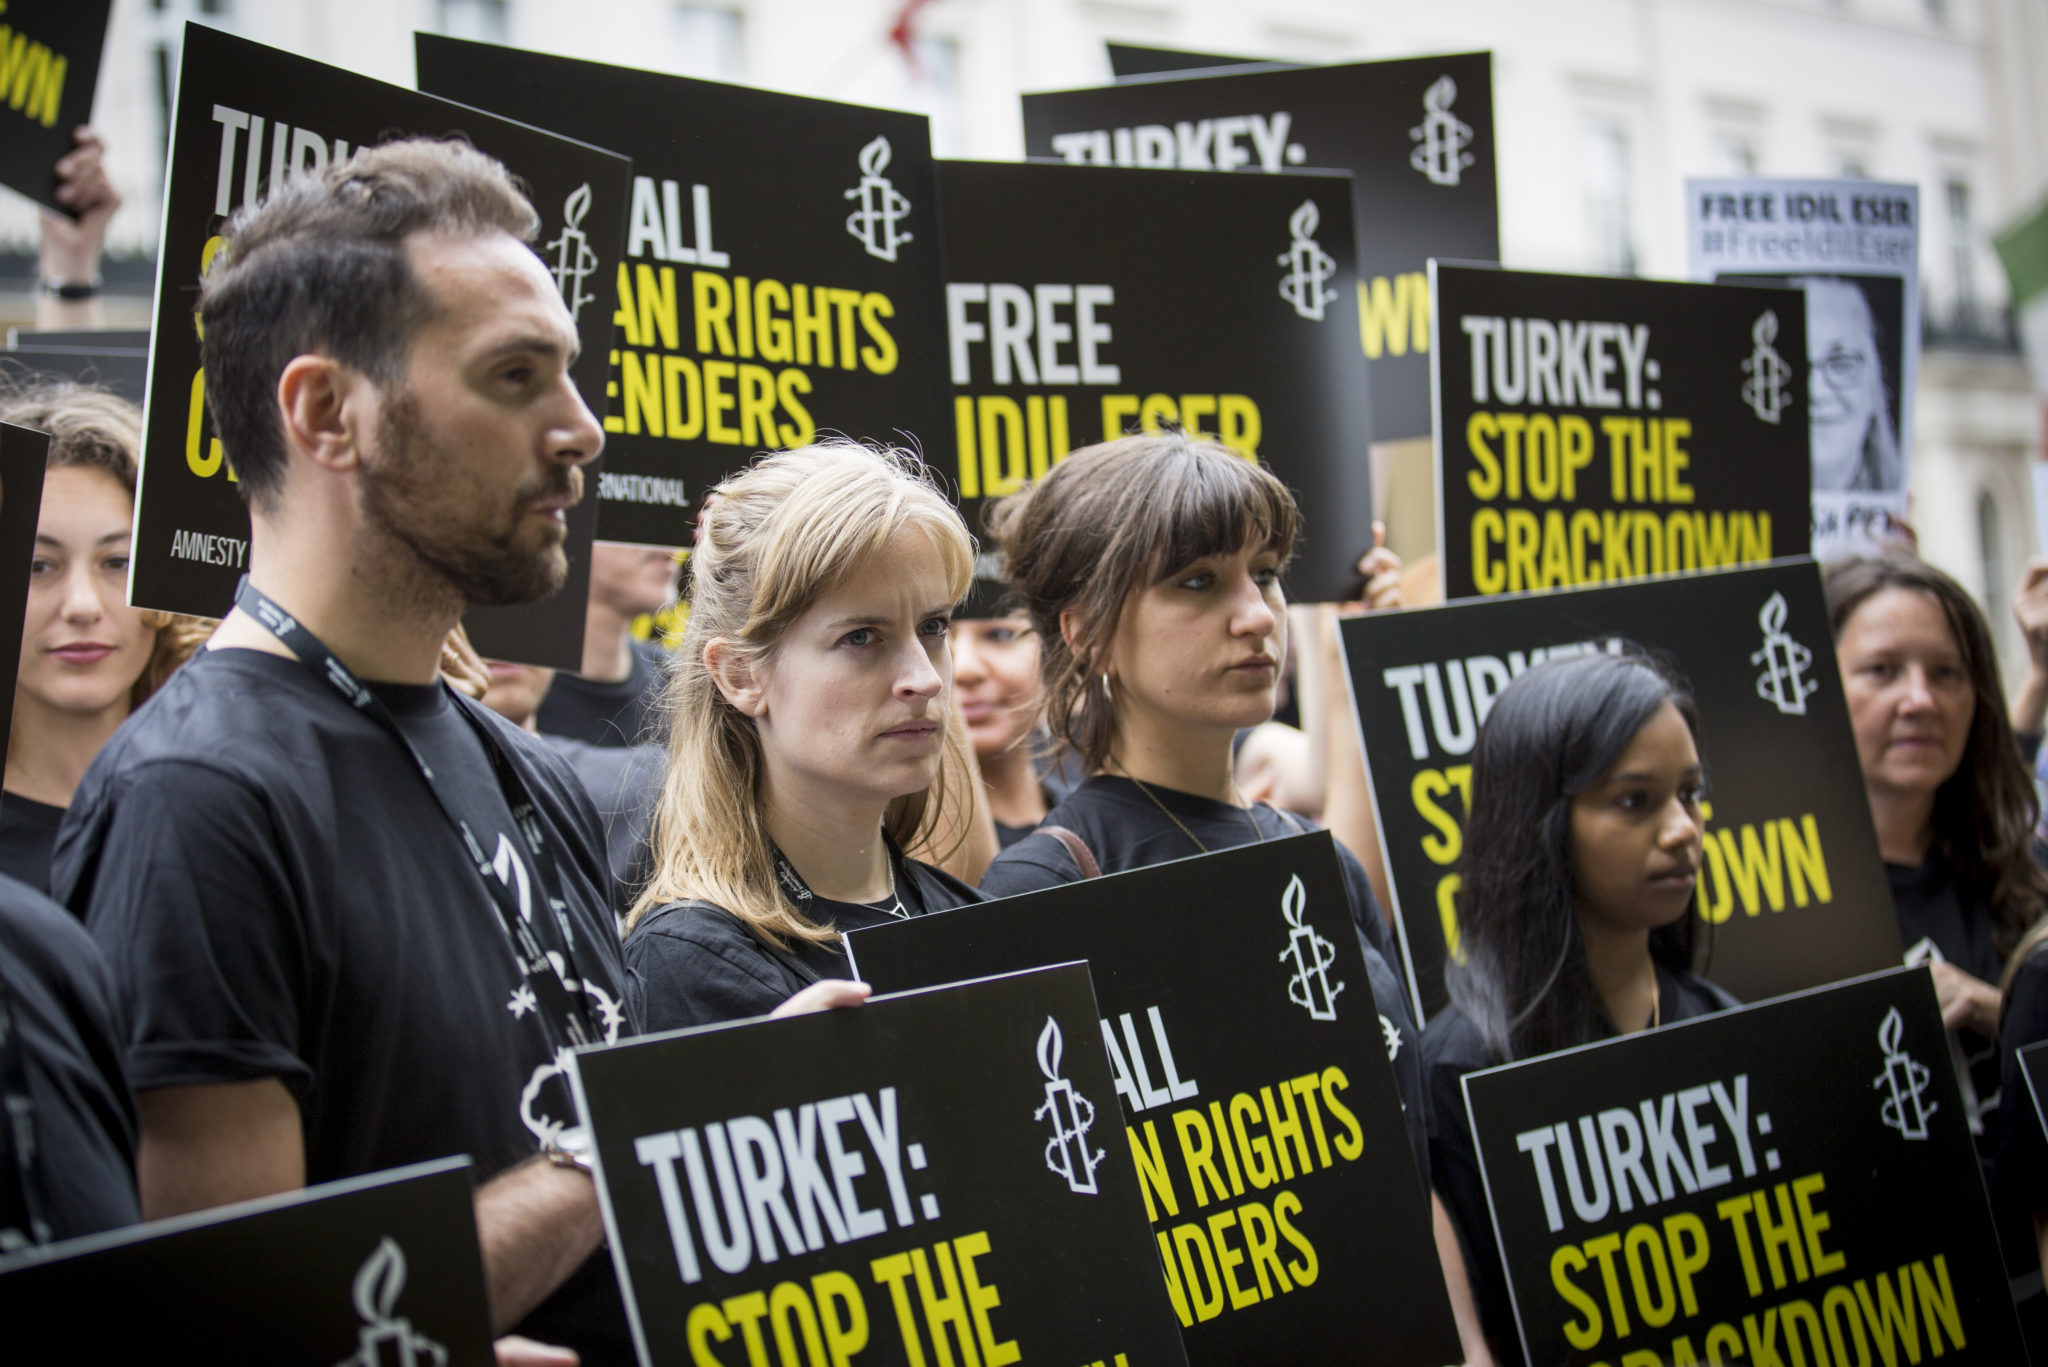 Turkey: Judicial farce must end with acquittal of human rights defenders